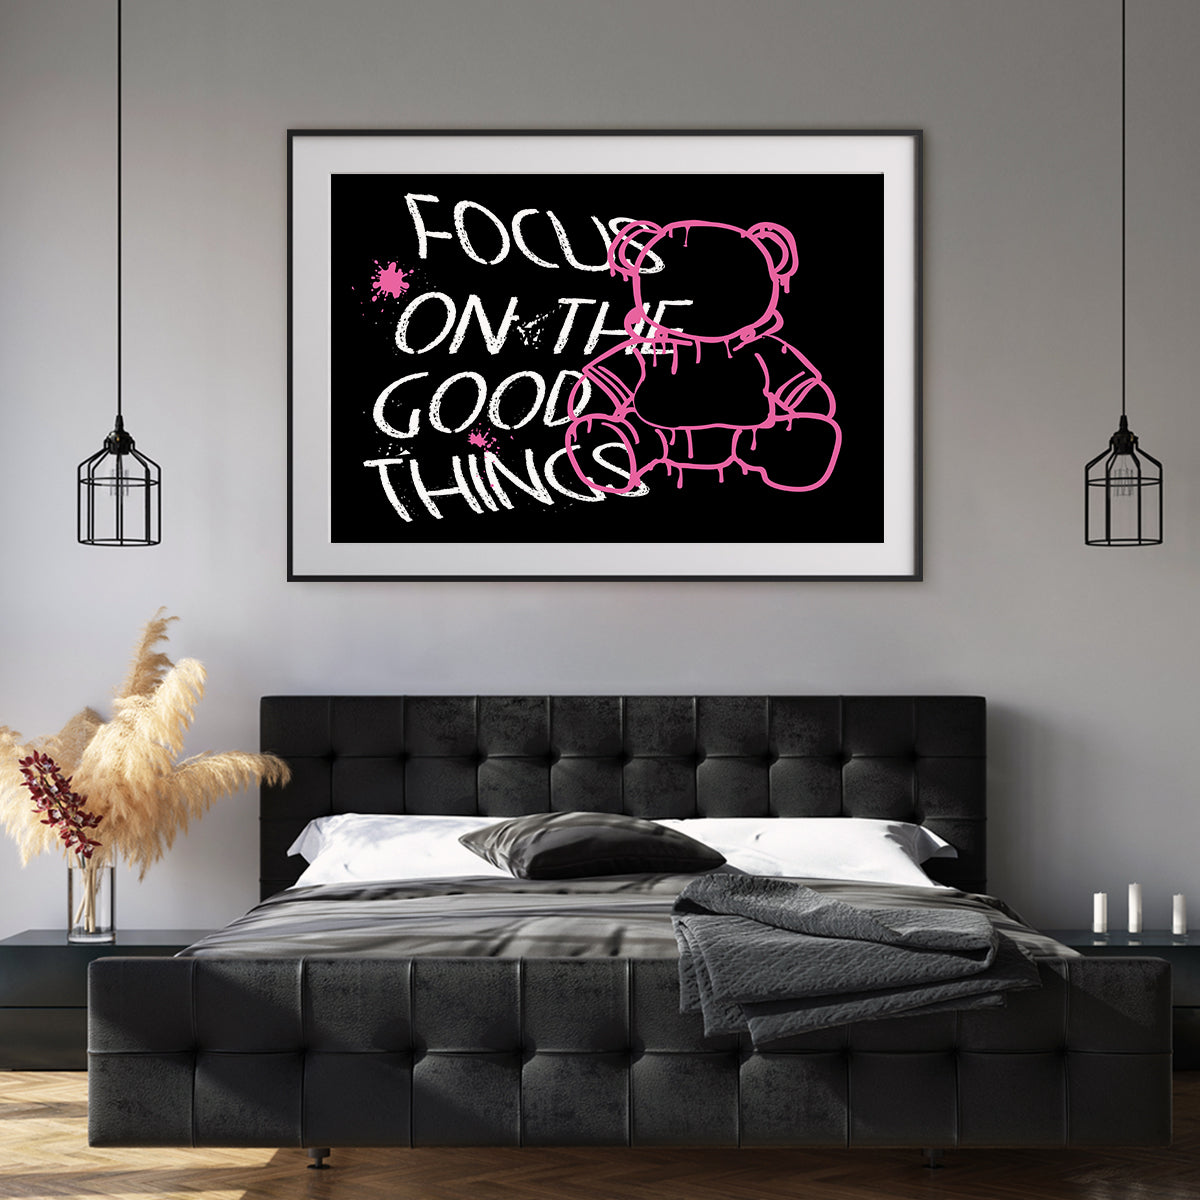 Focus on Good Things Motivational Quote Posters-Horizontal Posters NOT FRAMED-CetArt-10″x8″ inches-CetArt